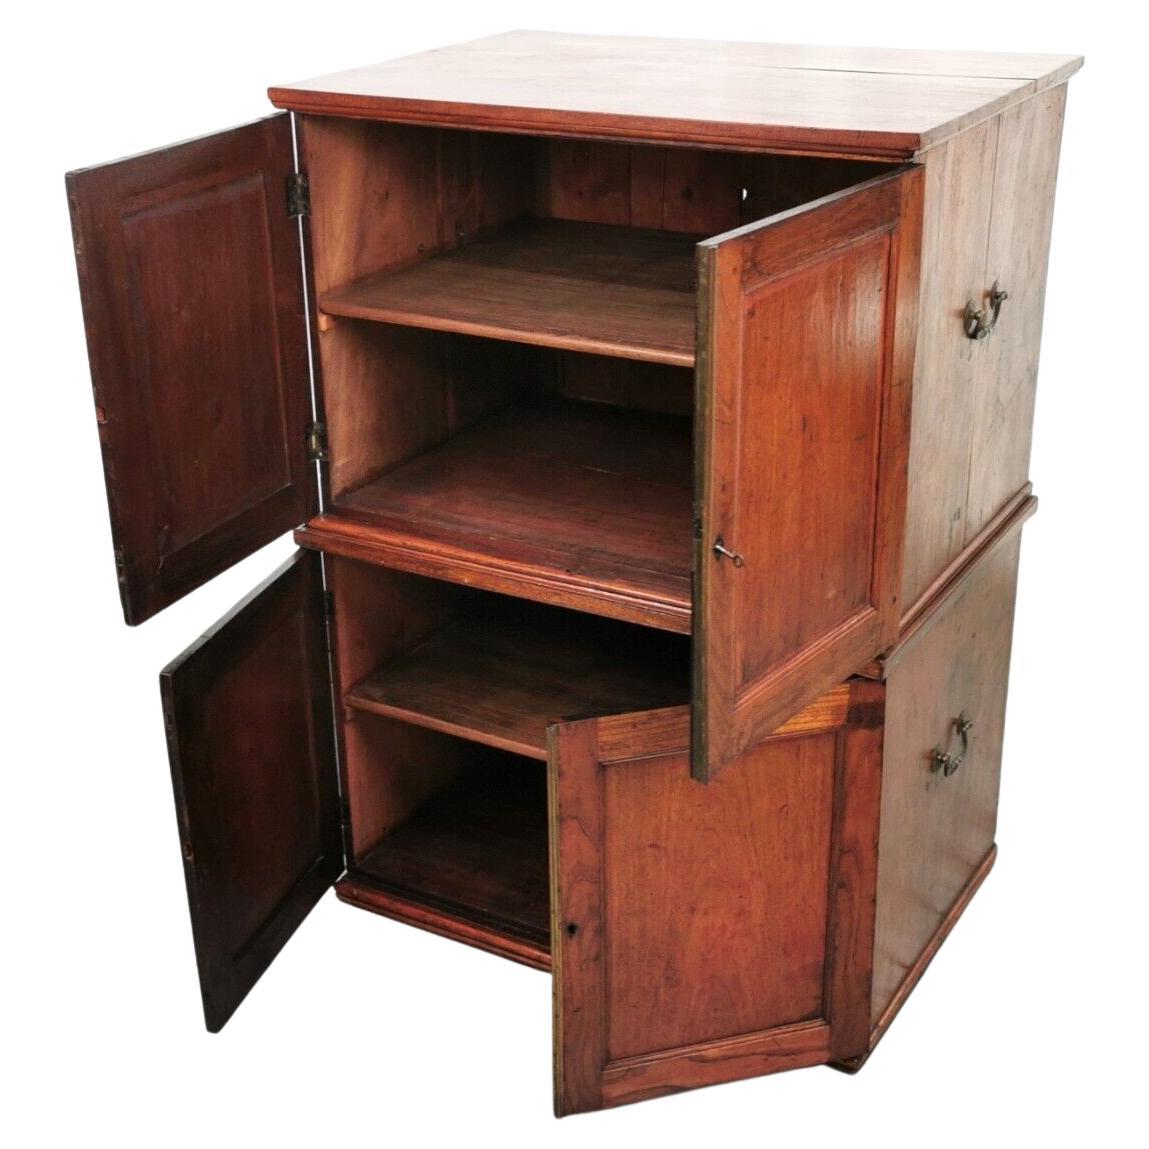 Available for sale is a set of two campaign stackable cupboards with handles to the sides for transportation.

The unit has an oversailing top with moulded edge above a pair of panel-enclosed doors. The door sits over a shelf - size 111cm high,